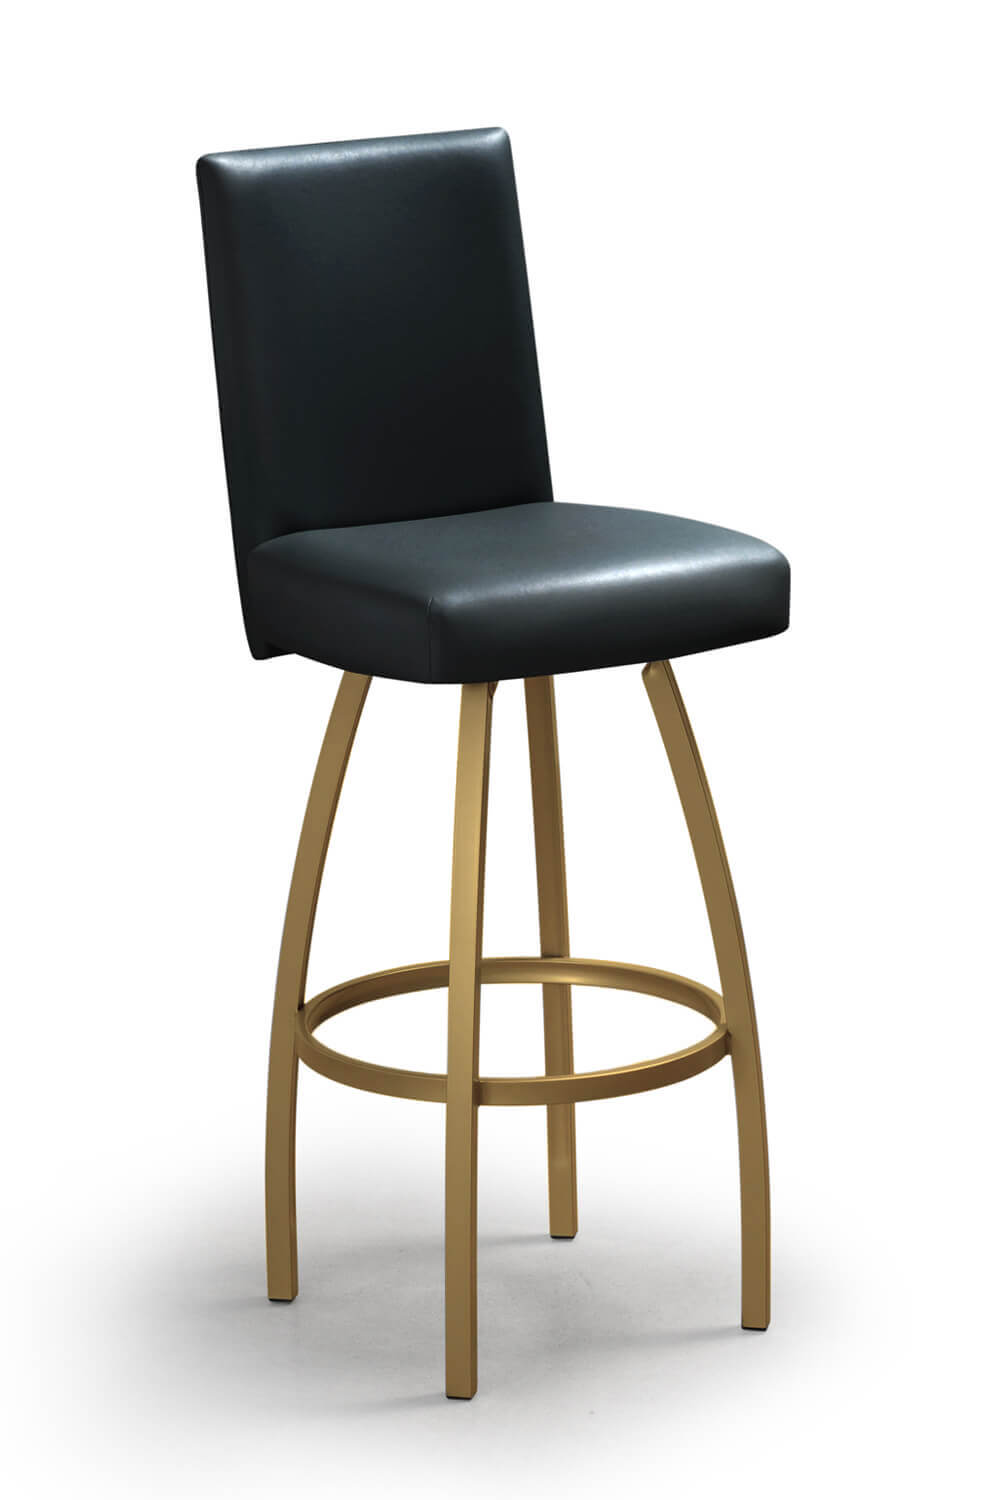 Nicholas Modern Swivel Bar Stool, What Is The Standard Seat Height For A Bar Stool